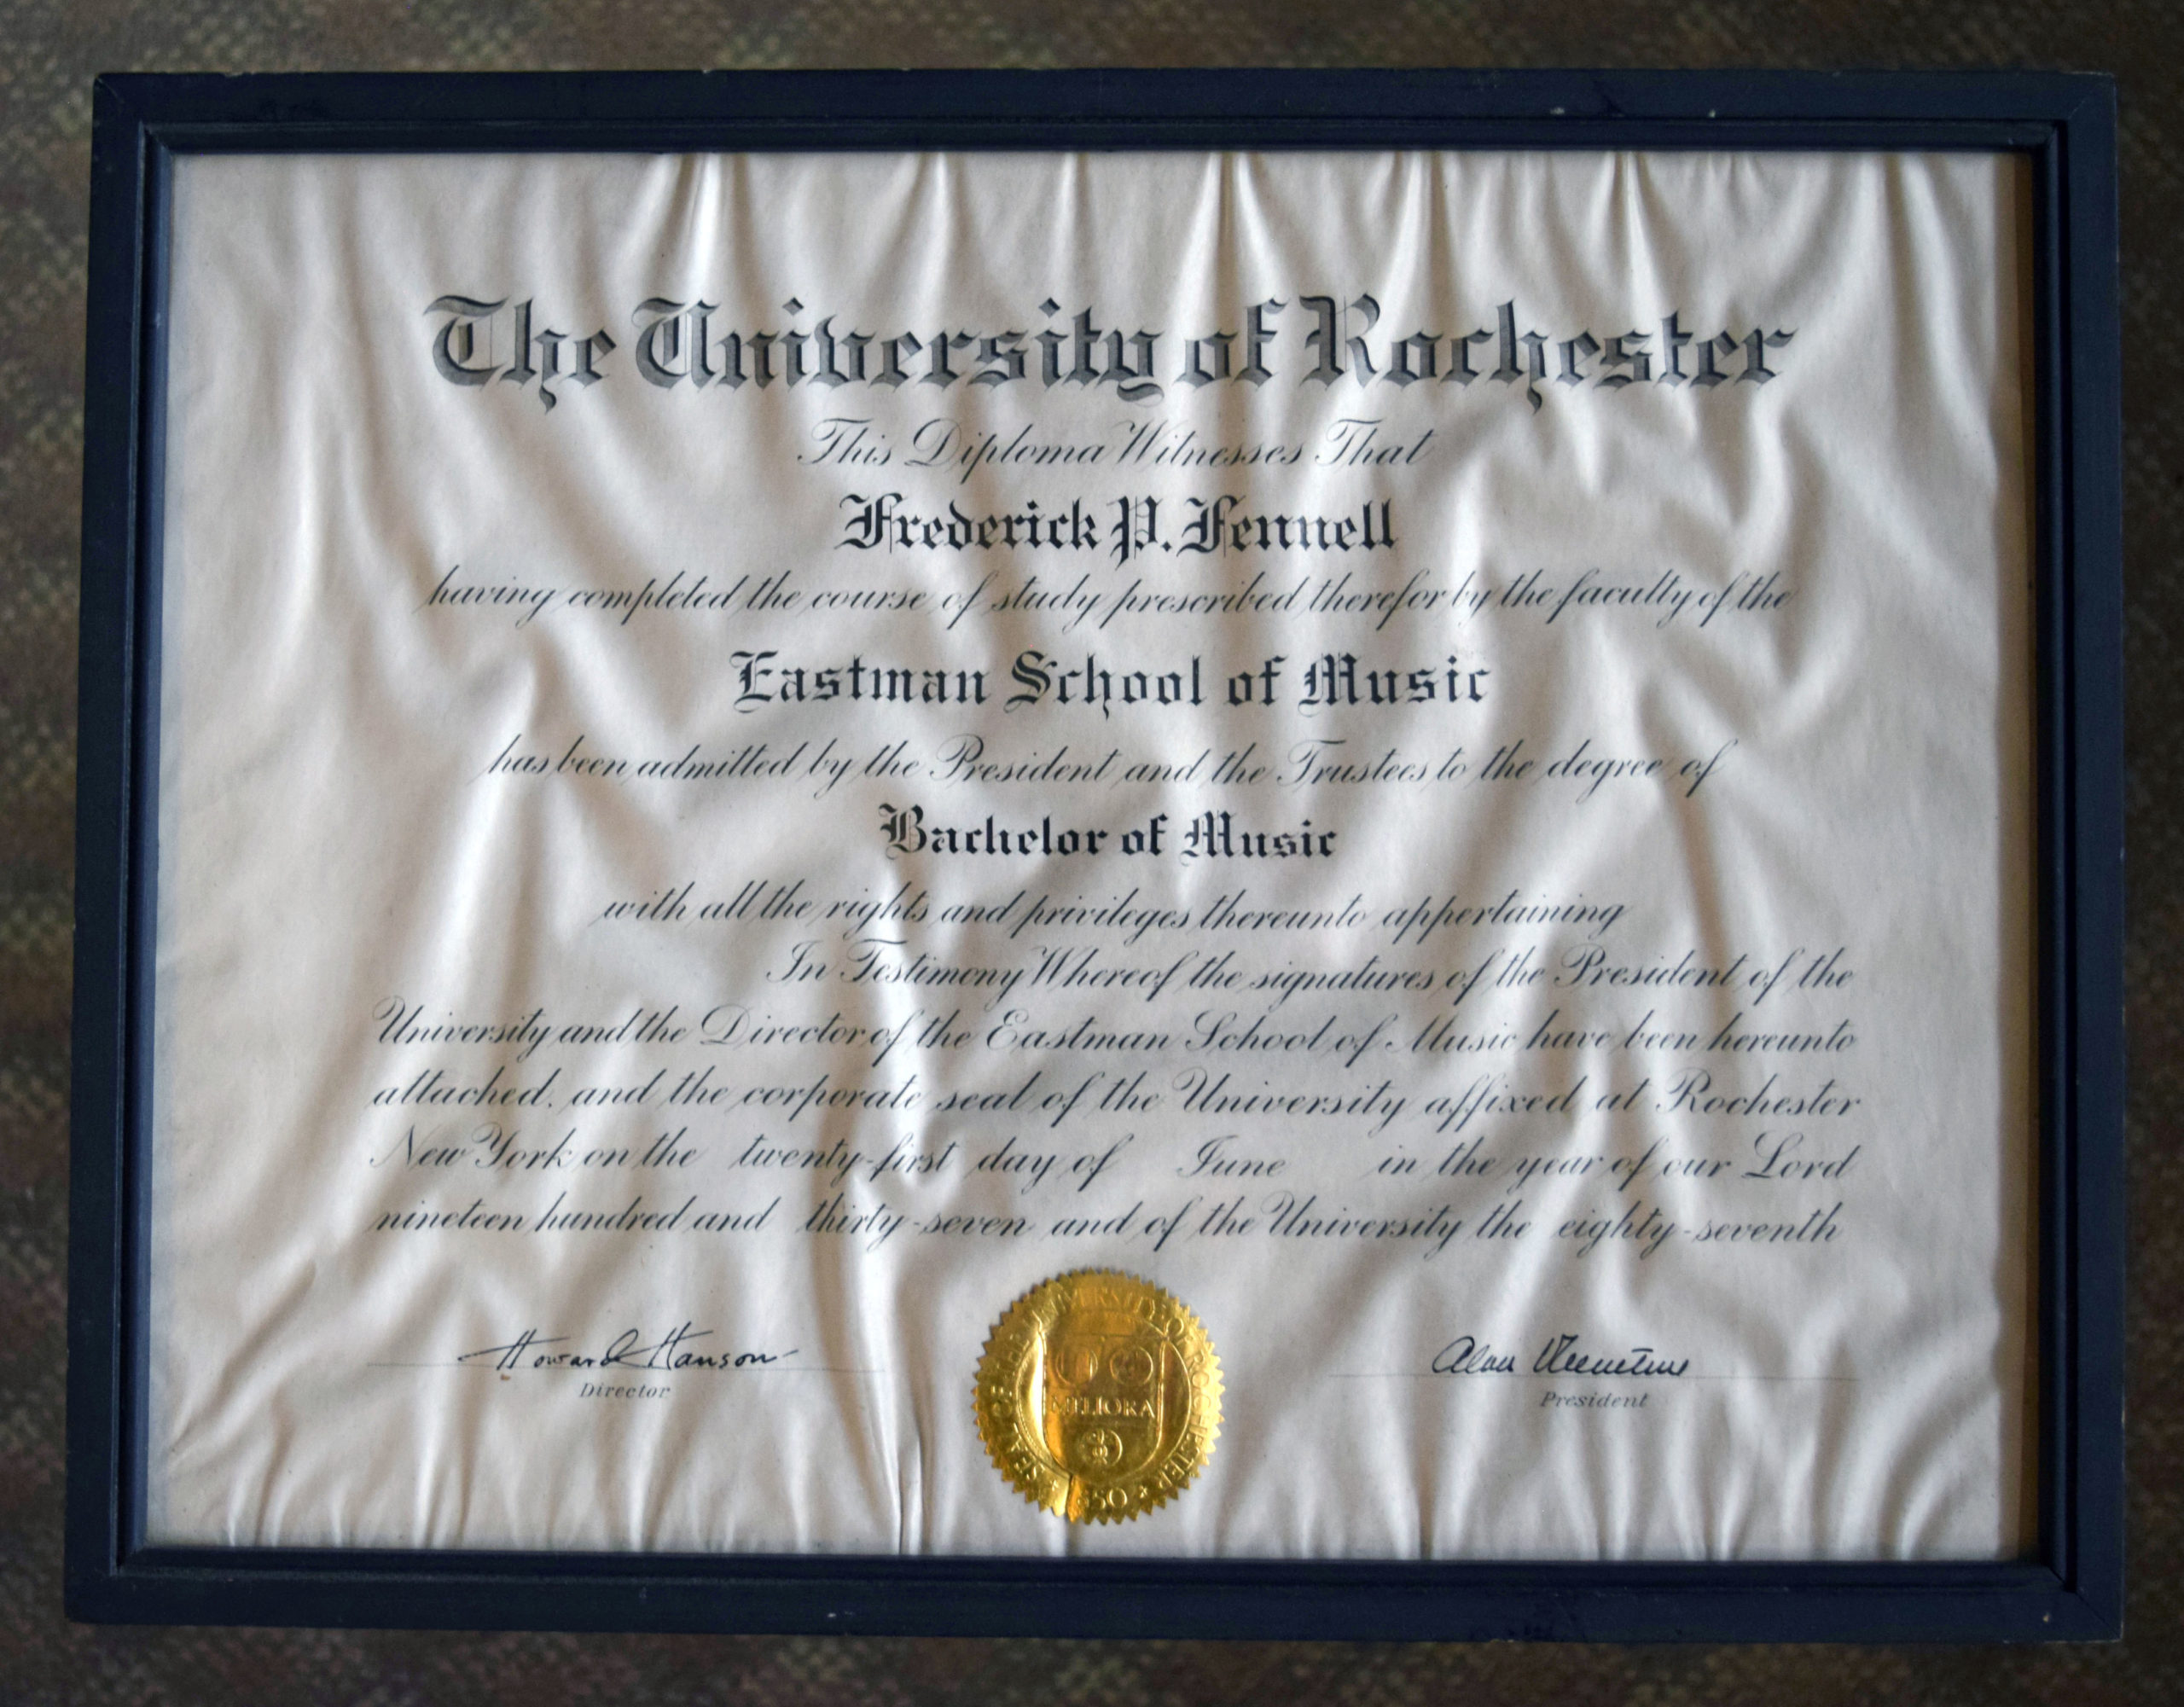 Fennell’s BM diploma from ESM (1937)